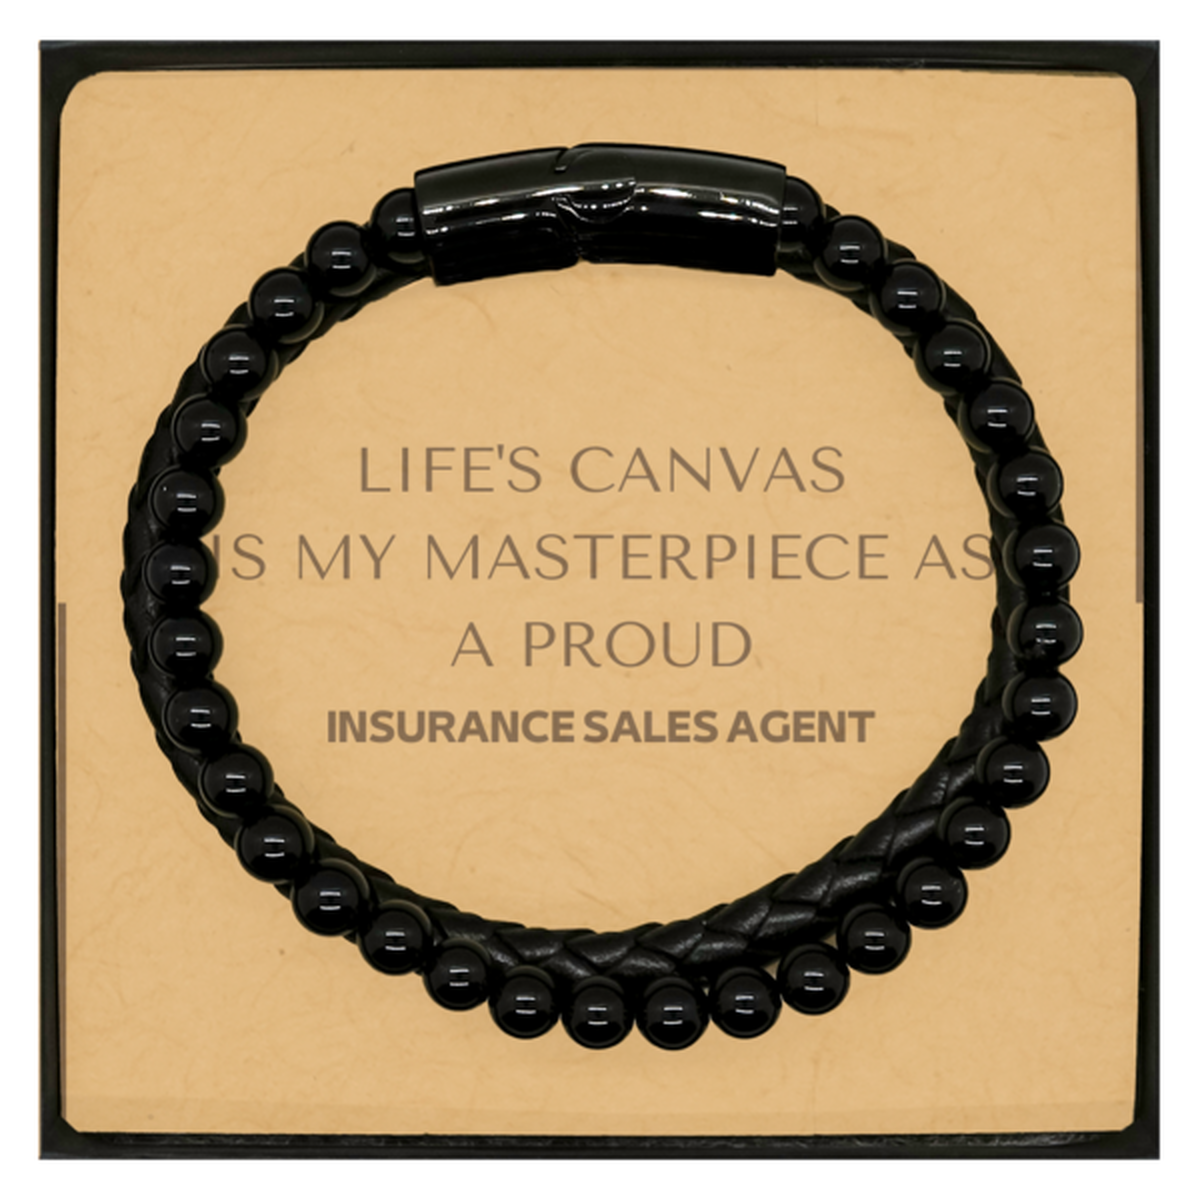 Proud Insurance Sales Agent Gifts, Life's canvas is my masterpiece, Epic Birthday Christmas Unique Stone Leather Bracelets For Insurance Sales Agent, Coworkers, Men, Women, Friends